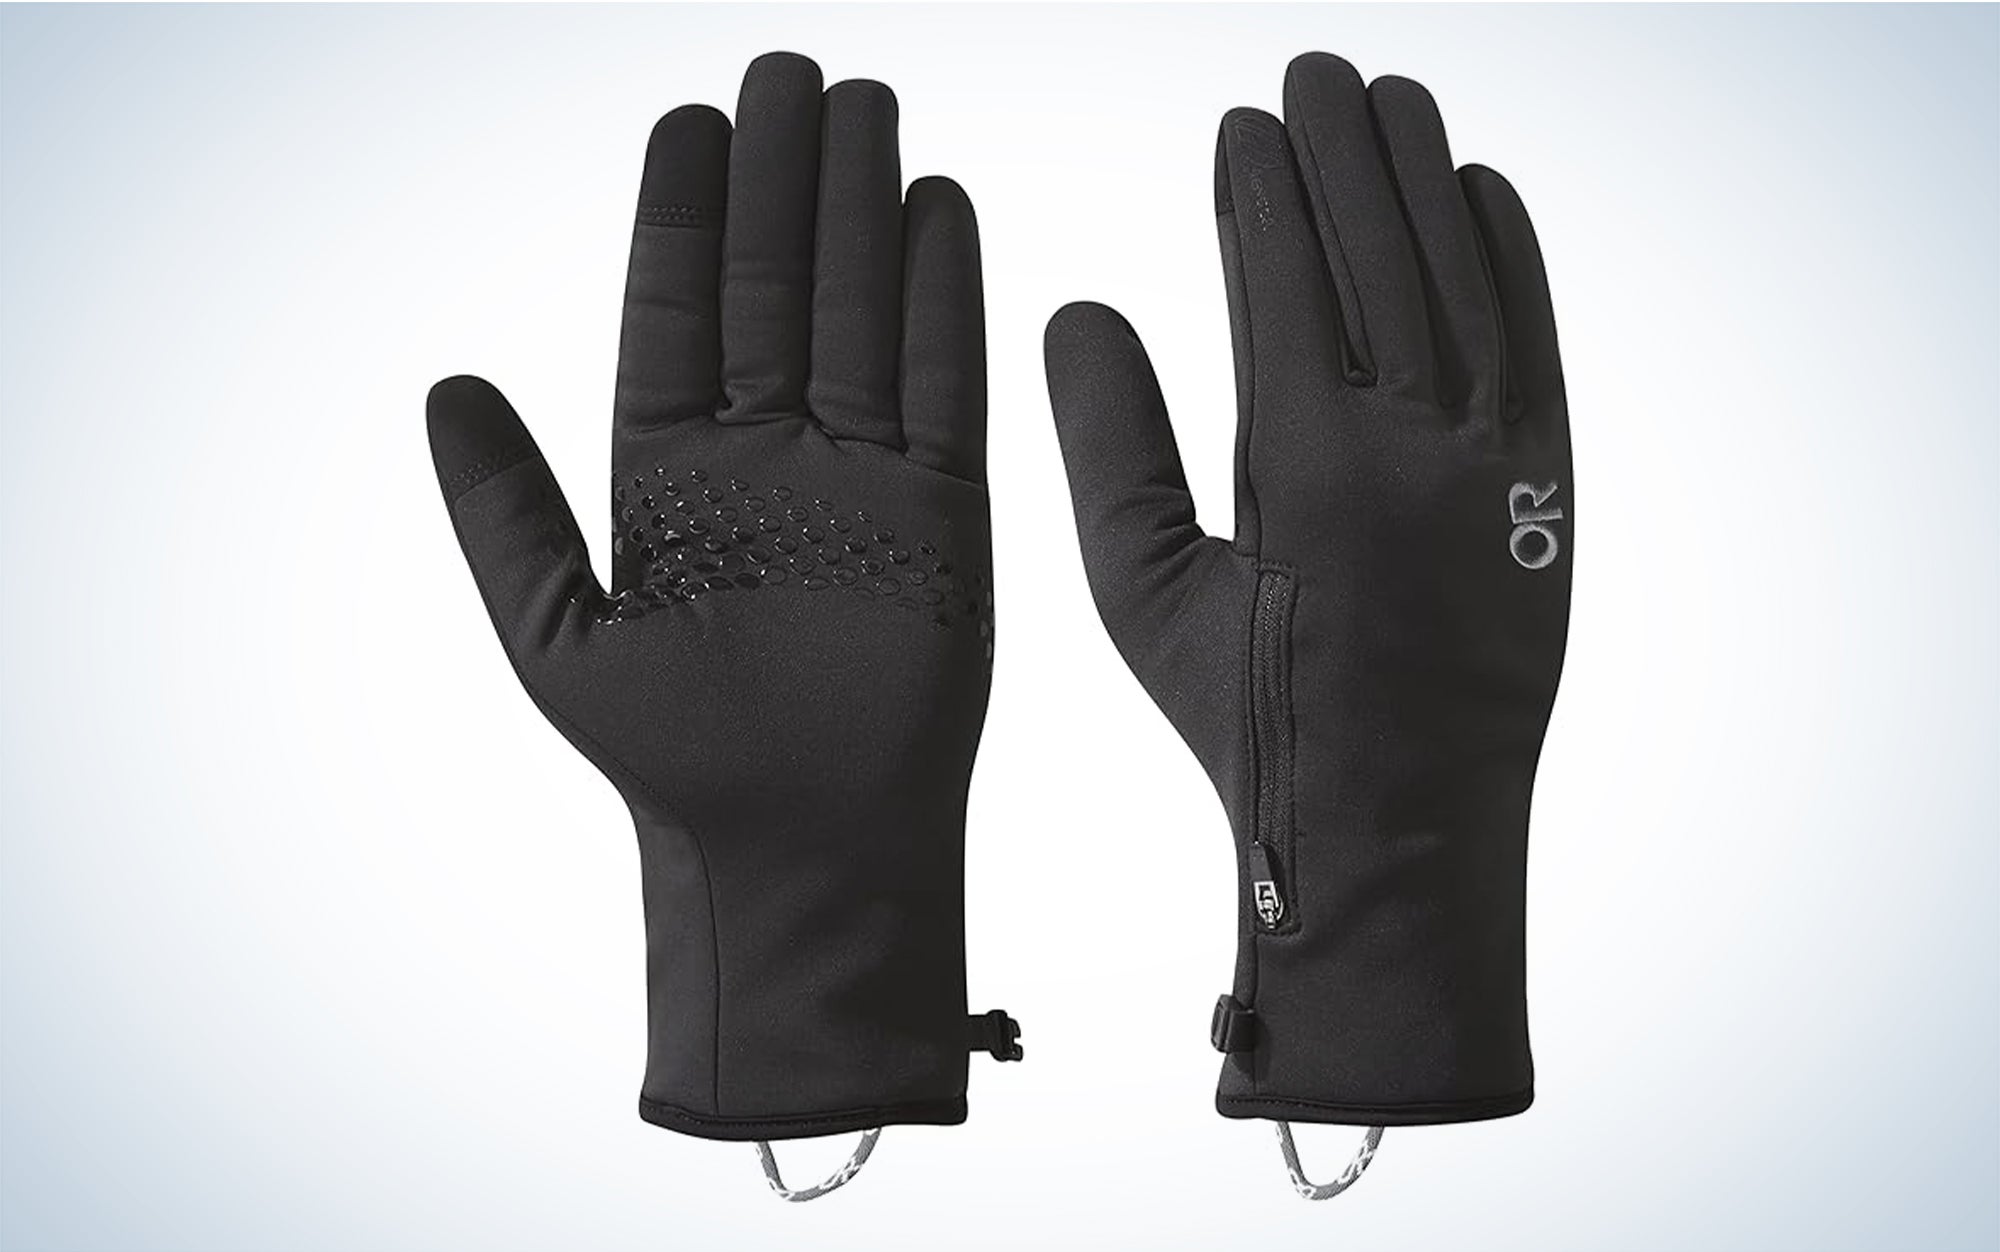 We tested the Outdoor Research Versaliner Sensor Gloves.